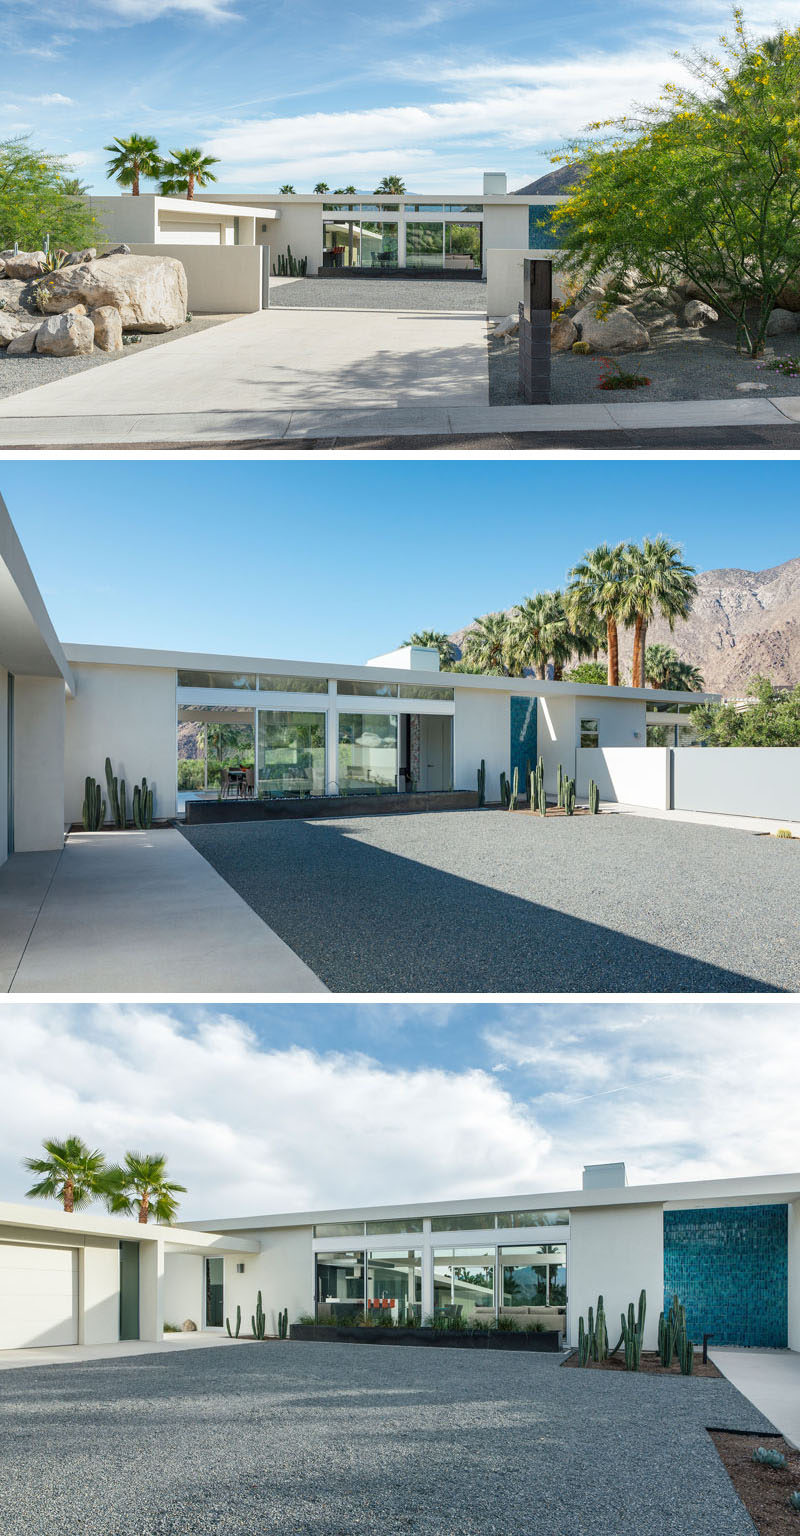 O2 Architecture have designed Las Palmas Heights Residence after being asked by their clients to design a home that would have an open plan living area and be built with durable materials.